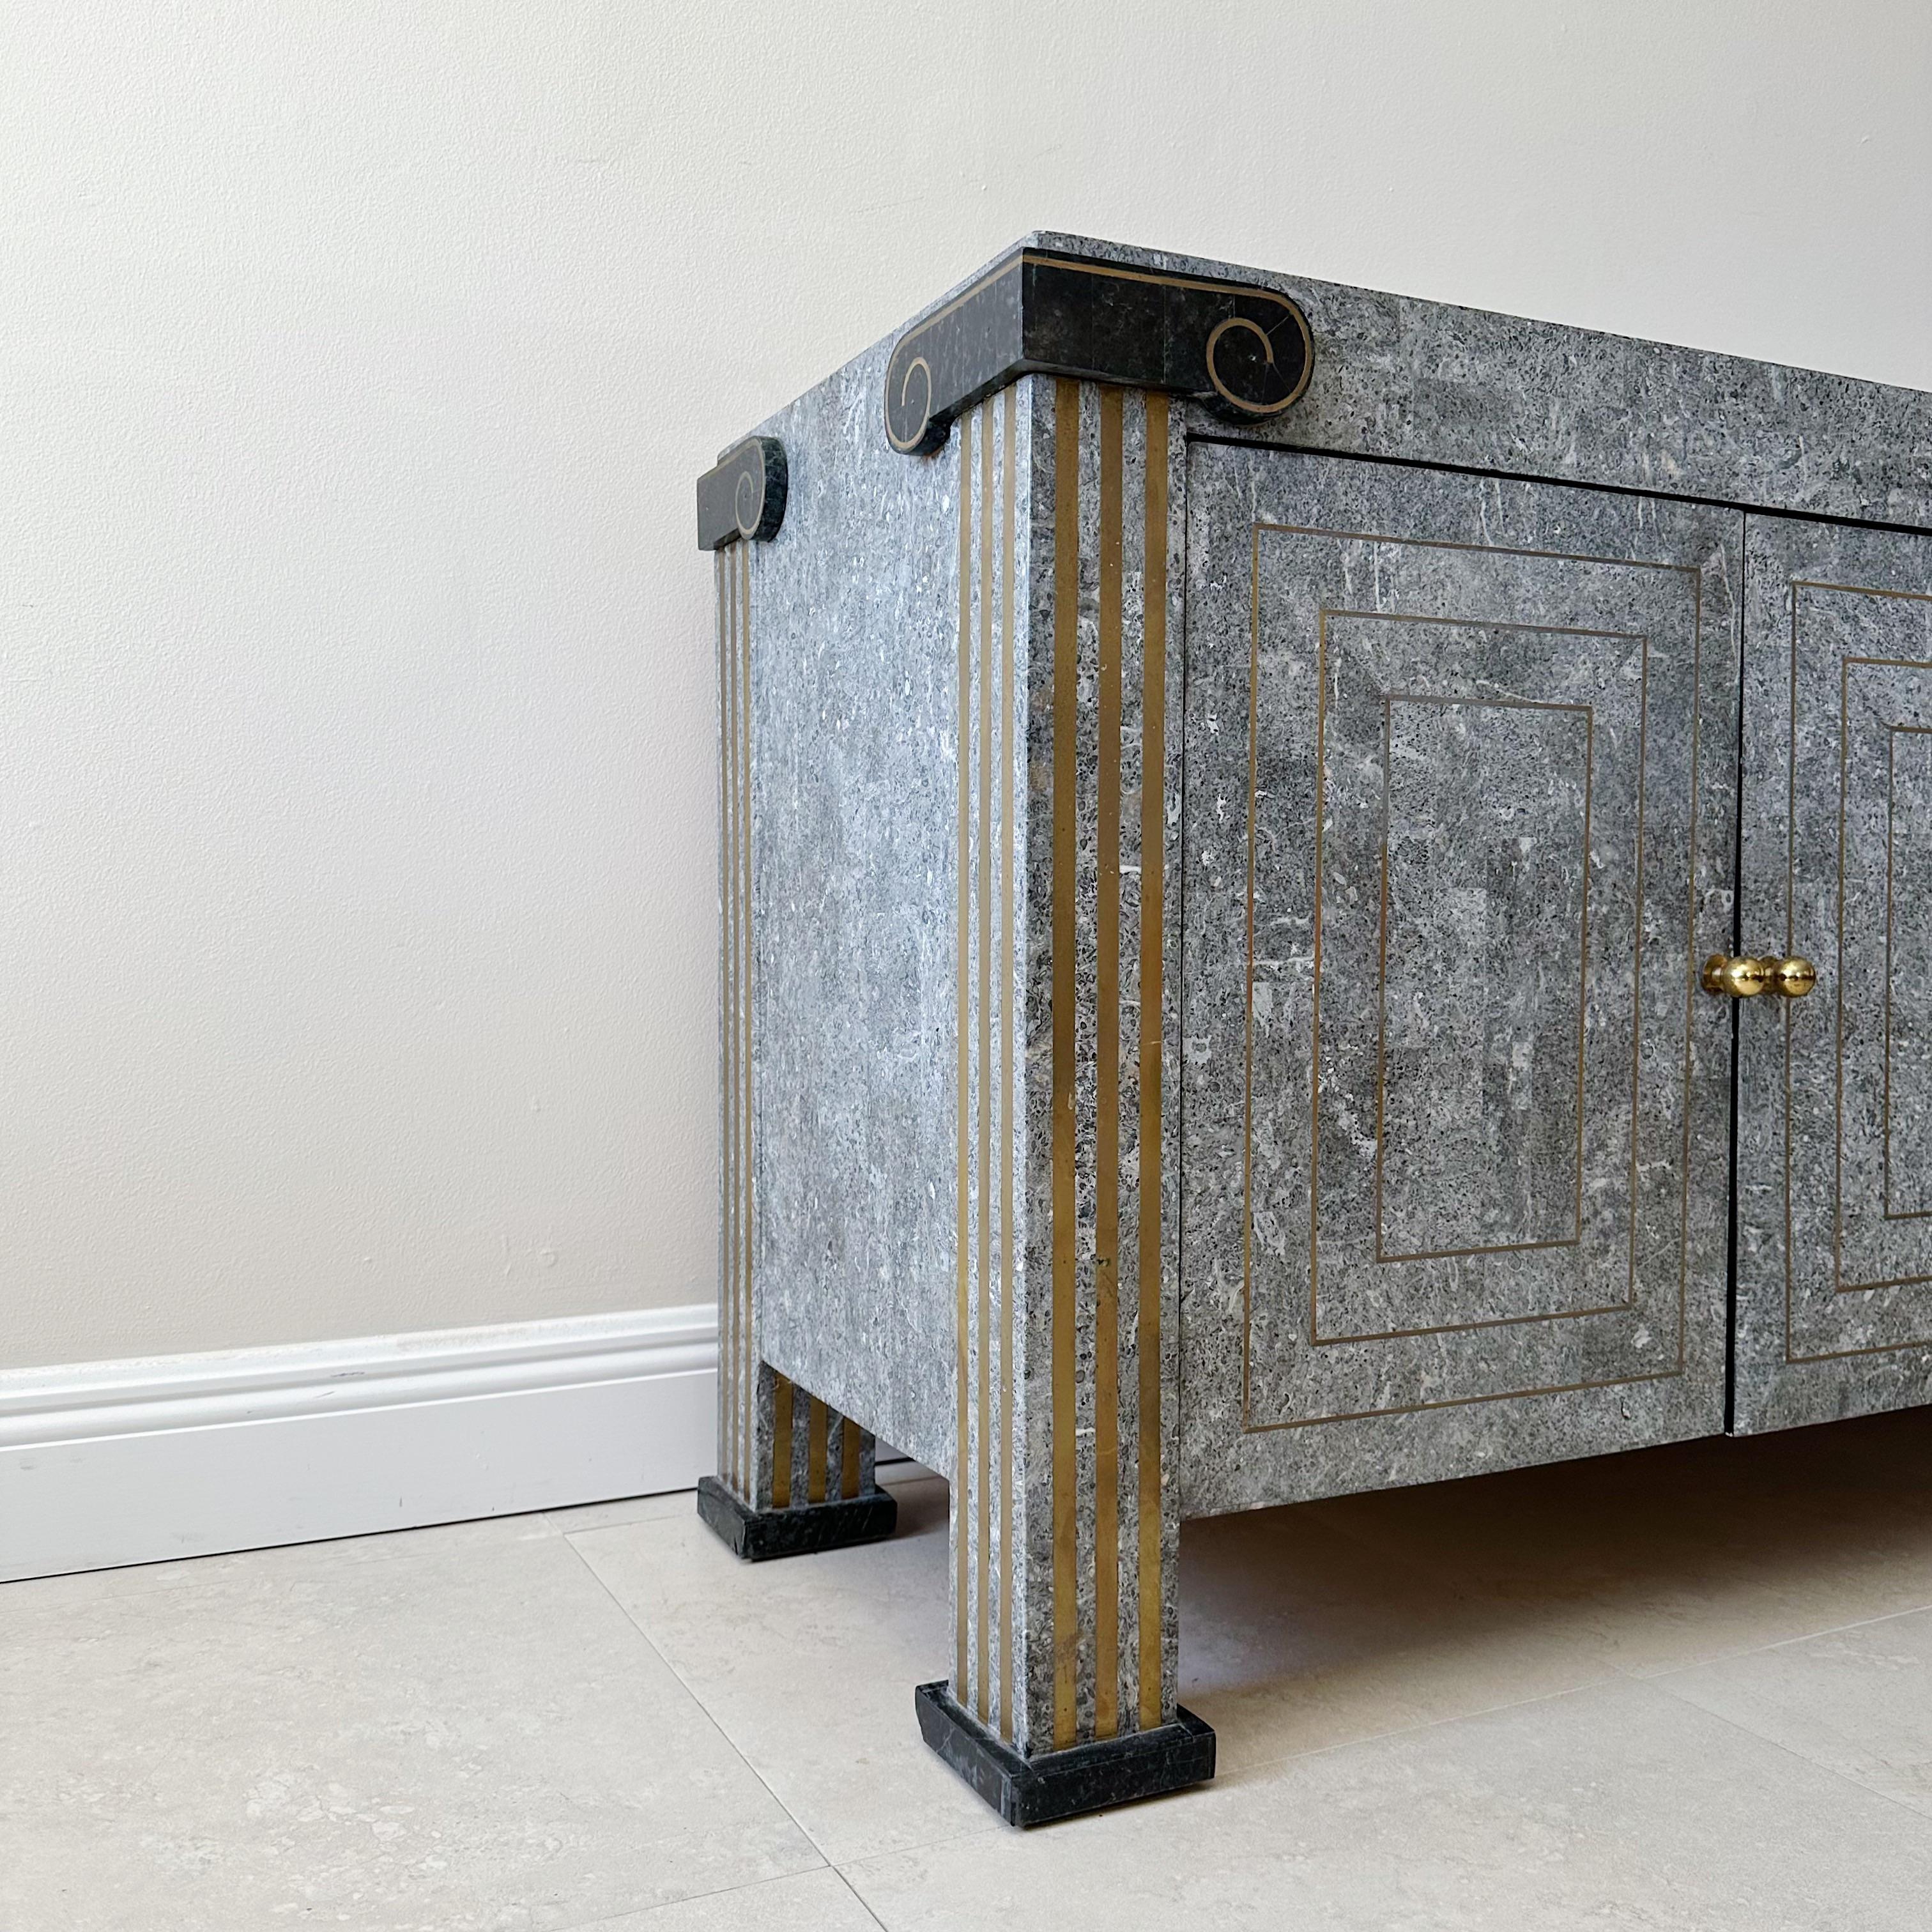 This exquisite sideboard credenza boasts a striking tessellated design in shades of gray, green, and black marble, accented with intricate brass inlay and door pulls. The cabinet's ends are elegantly crafted to resemble Greek columns, adding a touch